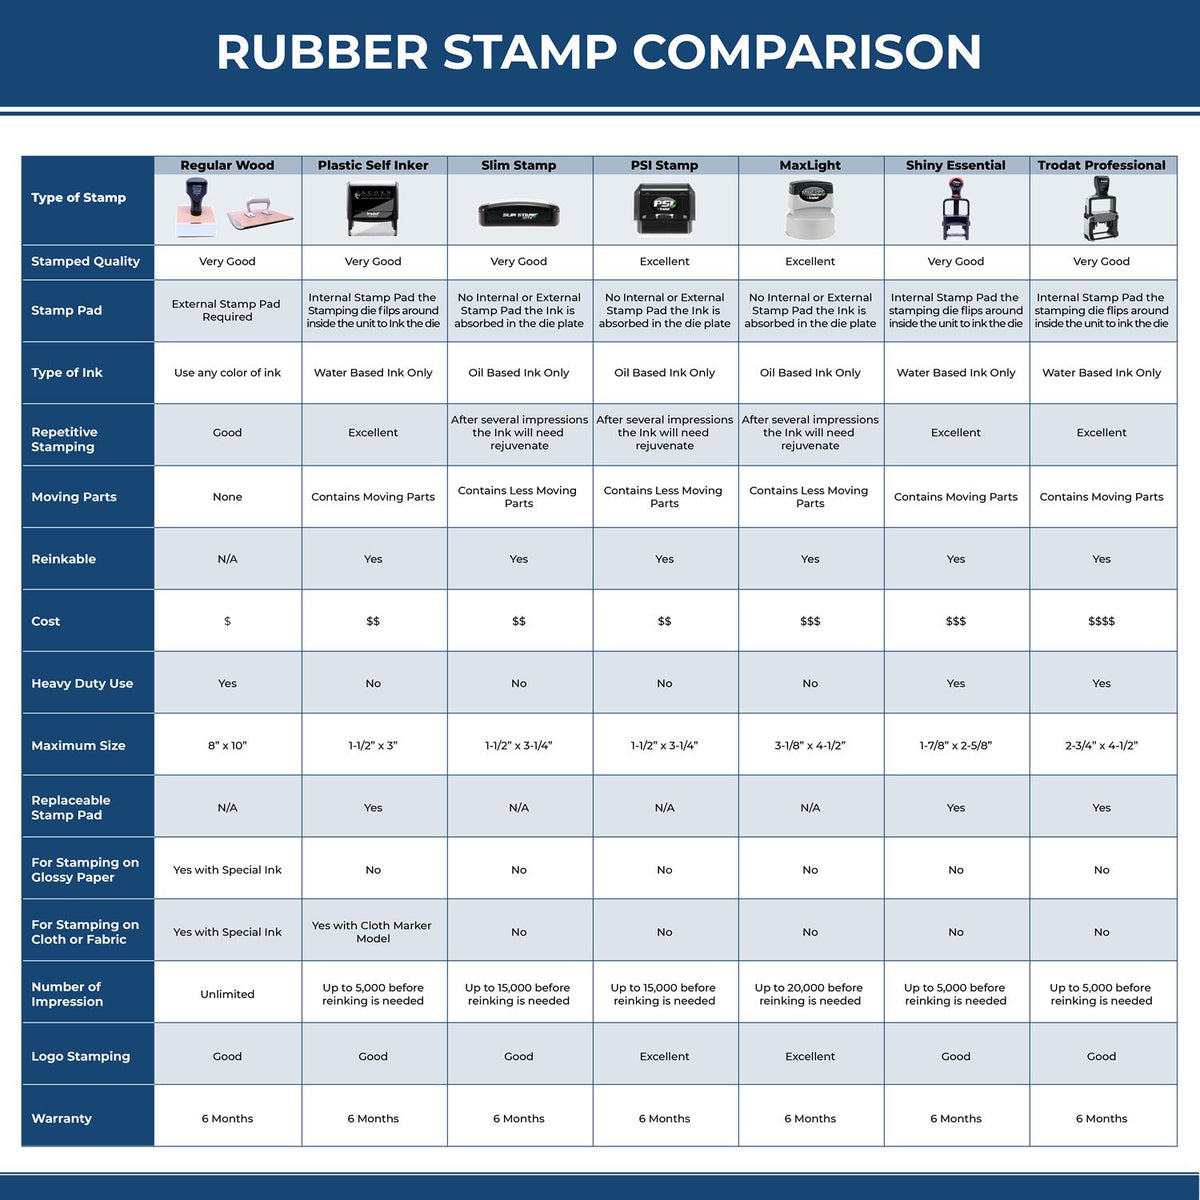 A comparison chart for the different types of mount models available for the Premium MaxLight Pre-Inked Massachusetts Engineering Stamp.